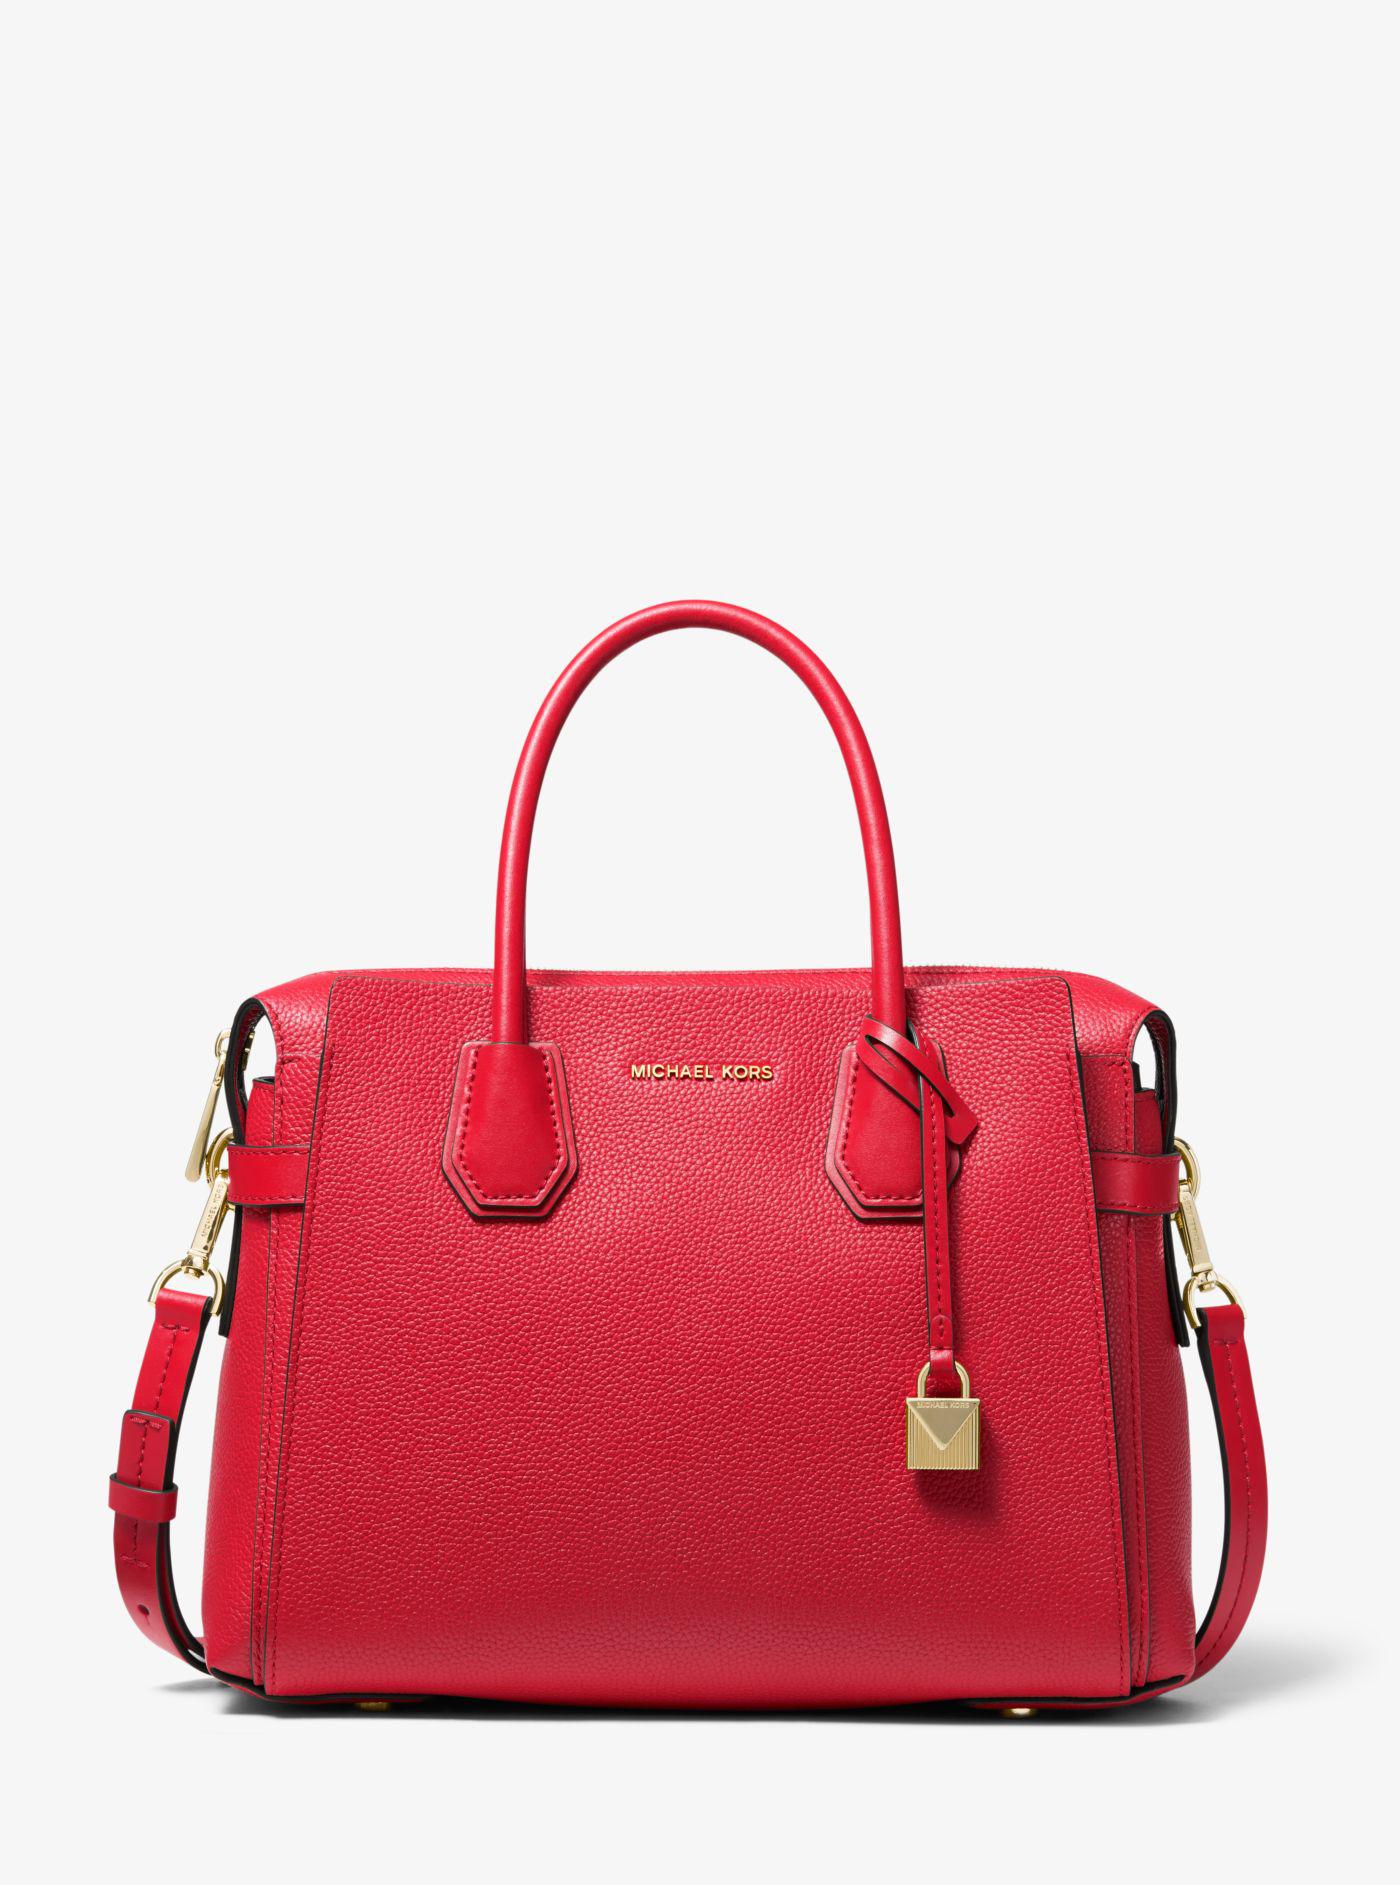 Michael Kors Mercer Medium Pebbled Leather Belted Satchel in Bright Red ...